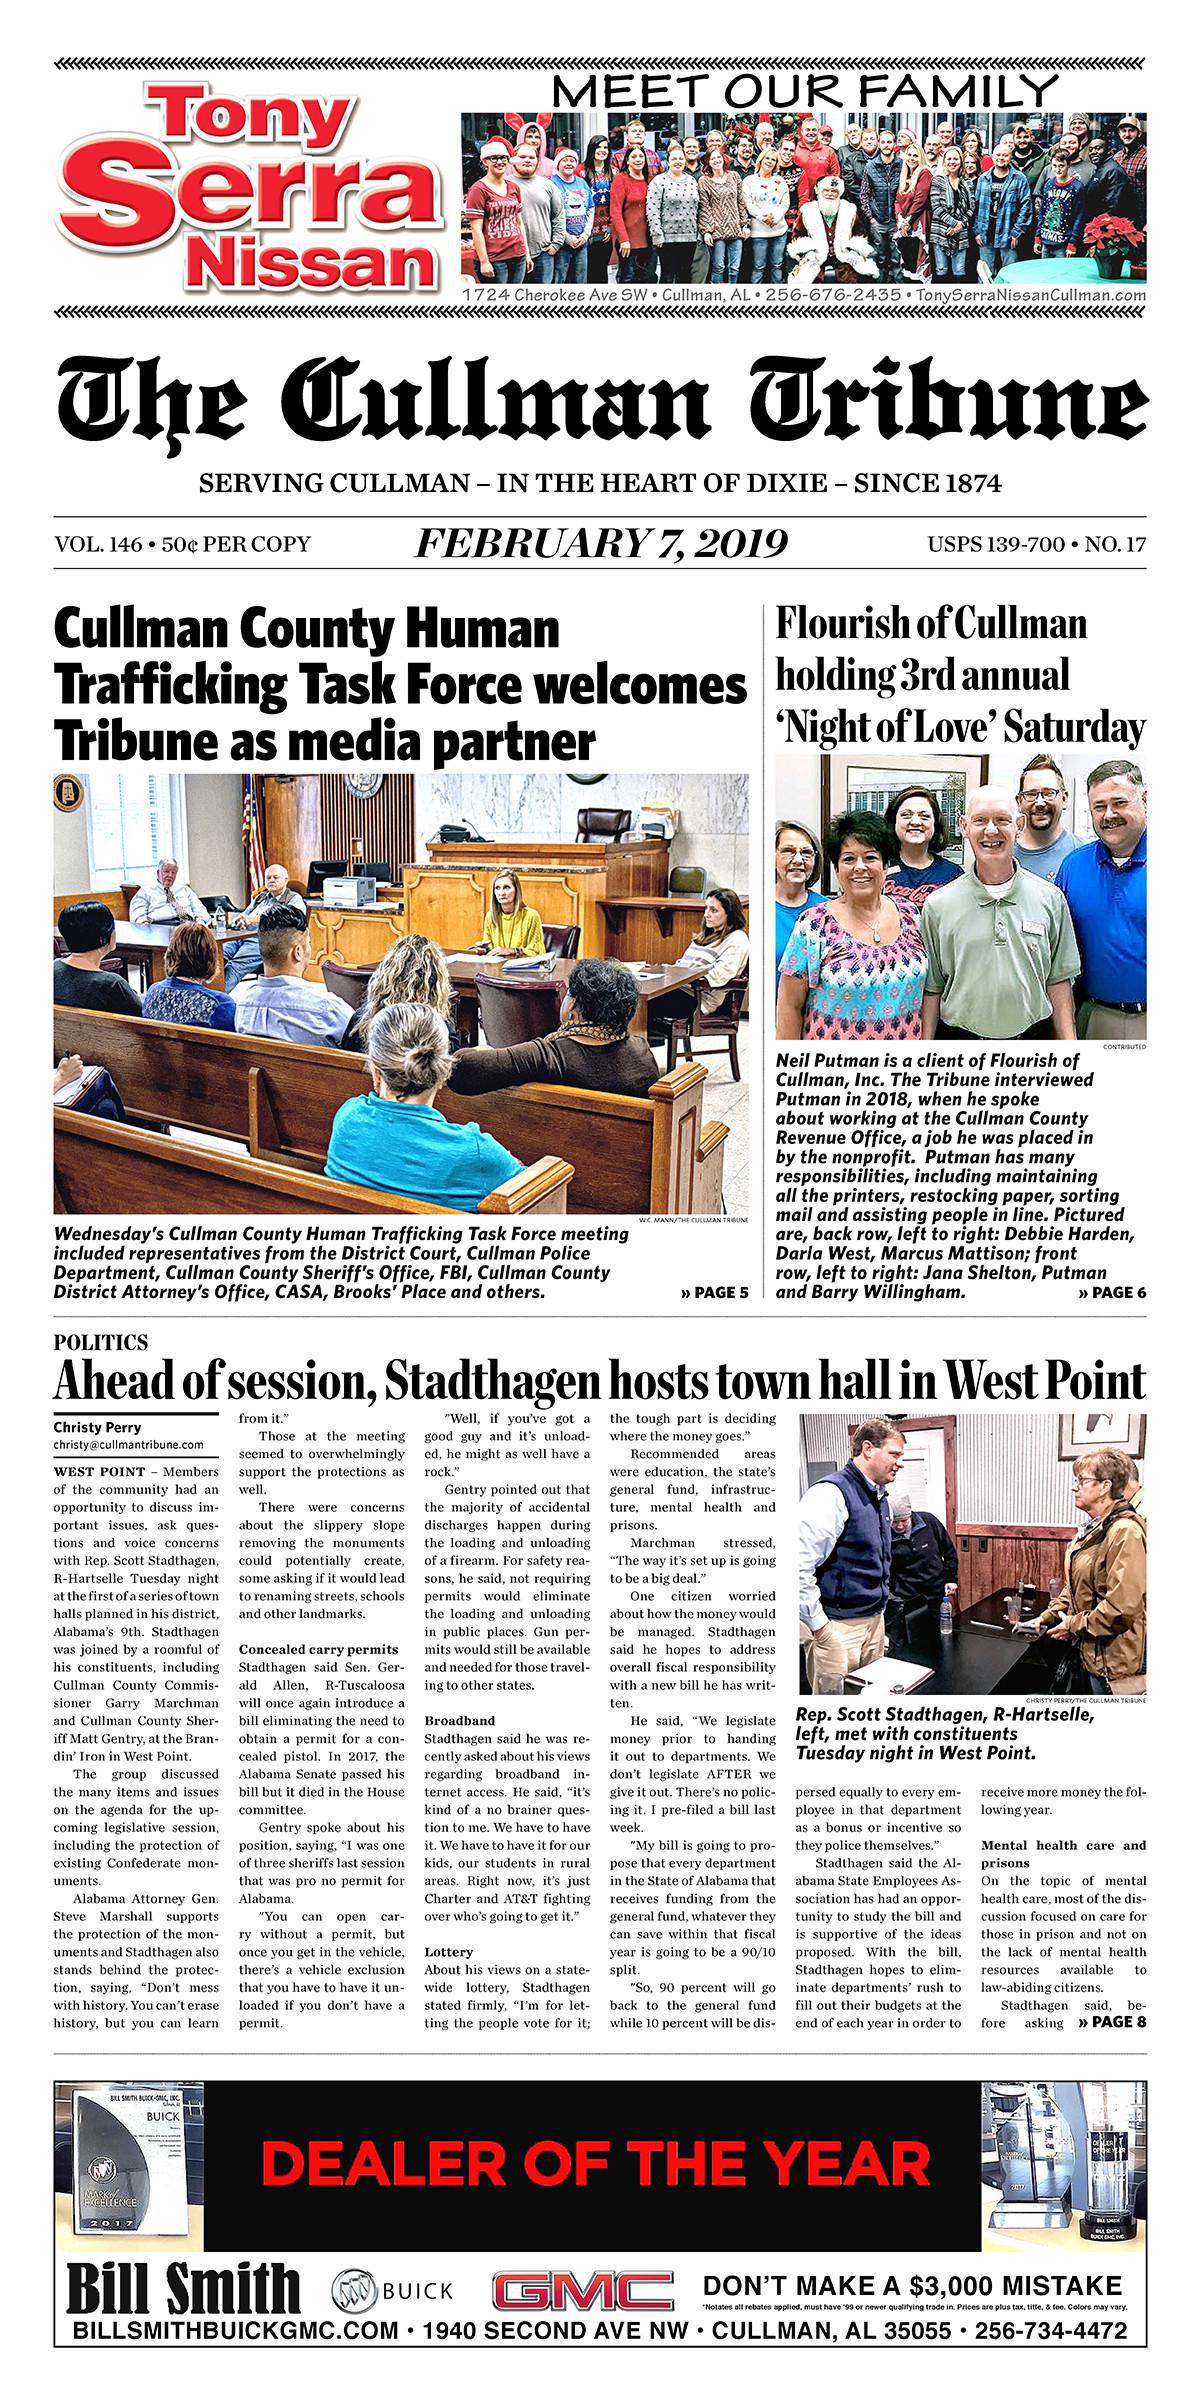 Good Morning Cullman! The 02-07-2019 edition of the Cullman Tribune is now ready to view